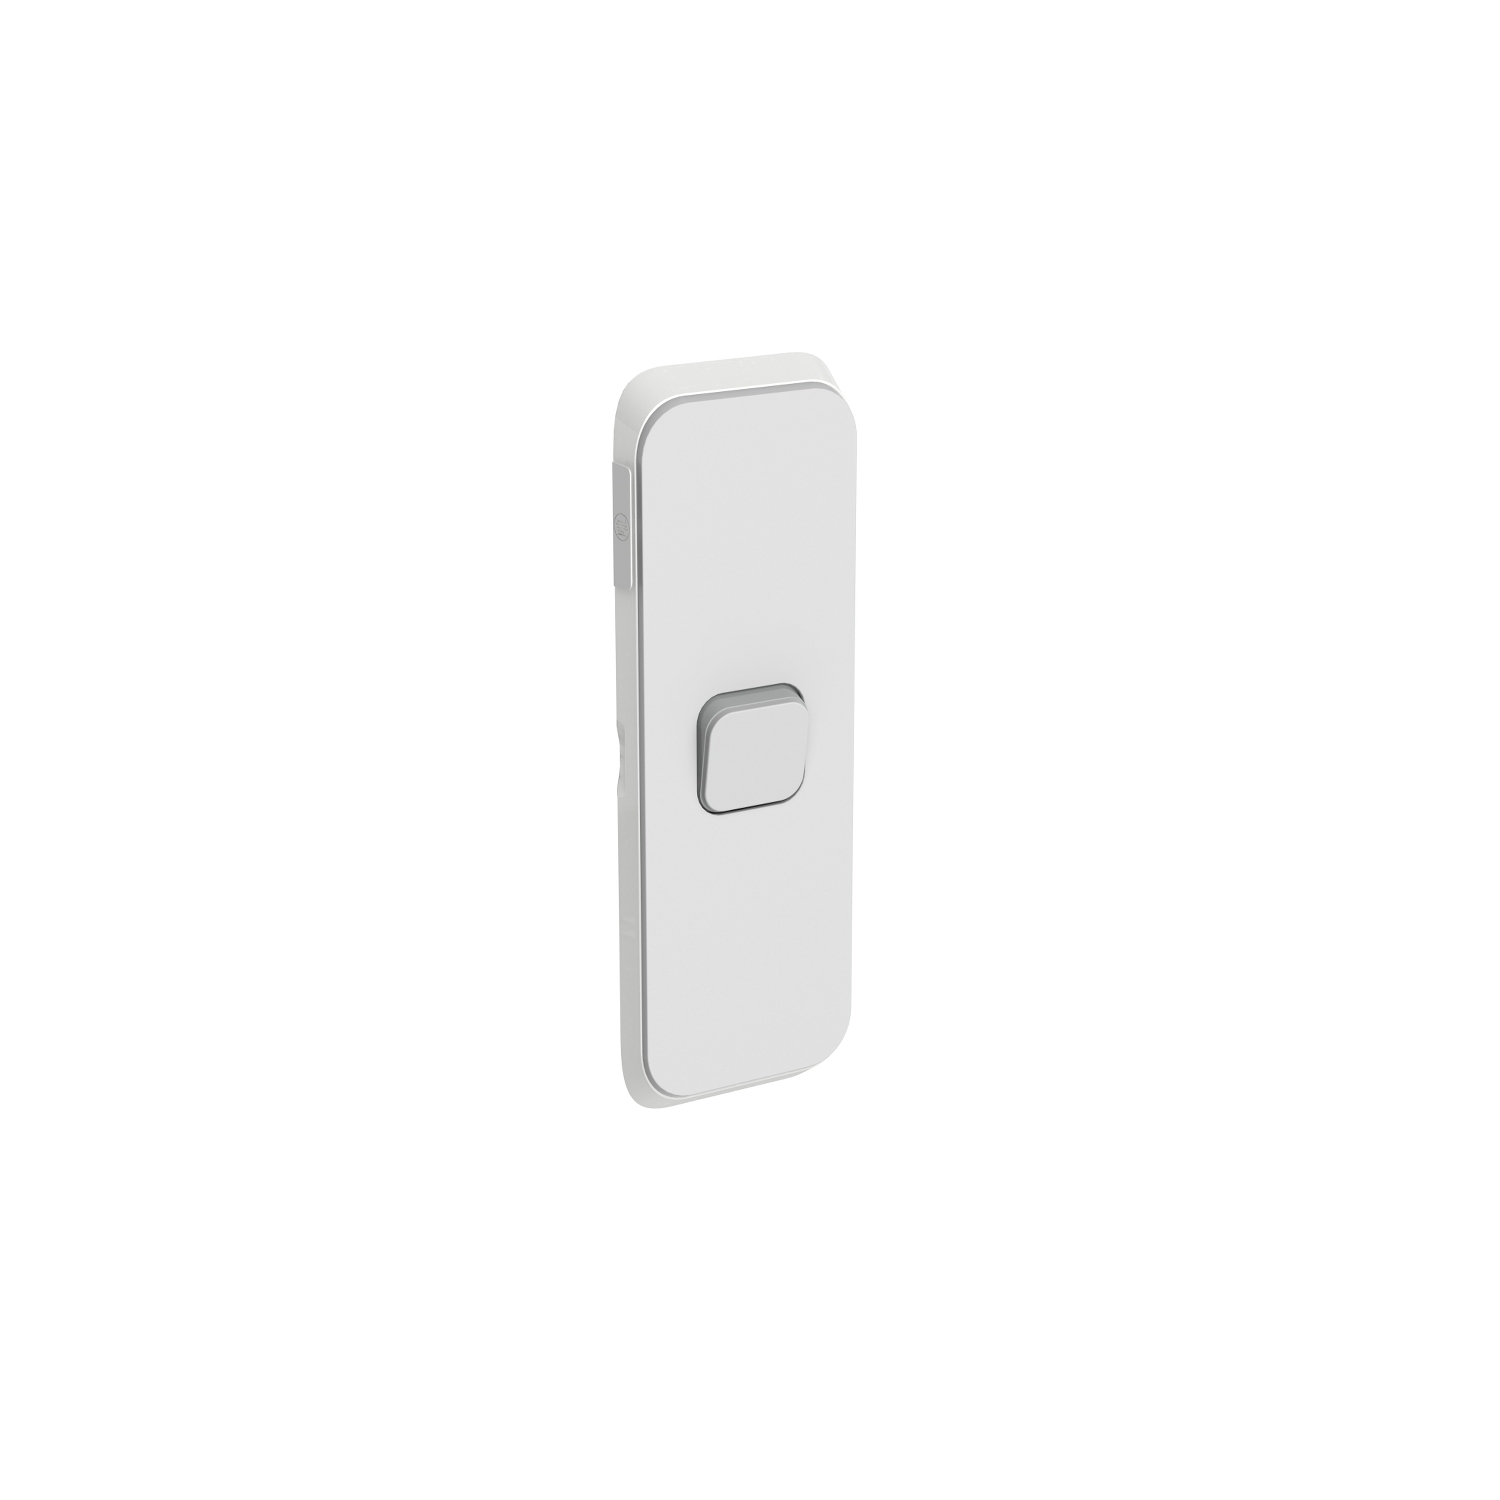 PDL361C-CY - PDL Iconic Cover Plate Switch Architrave 1Gang - Cool Grey